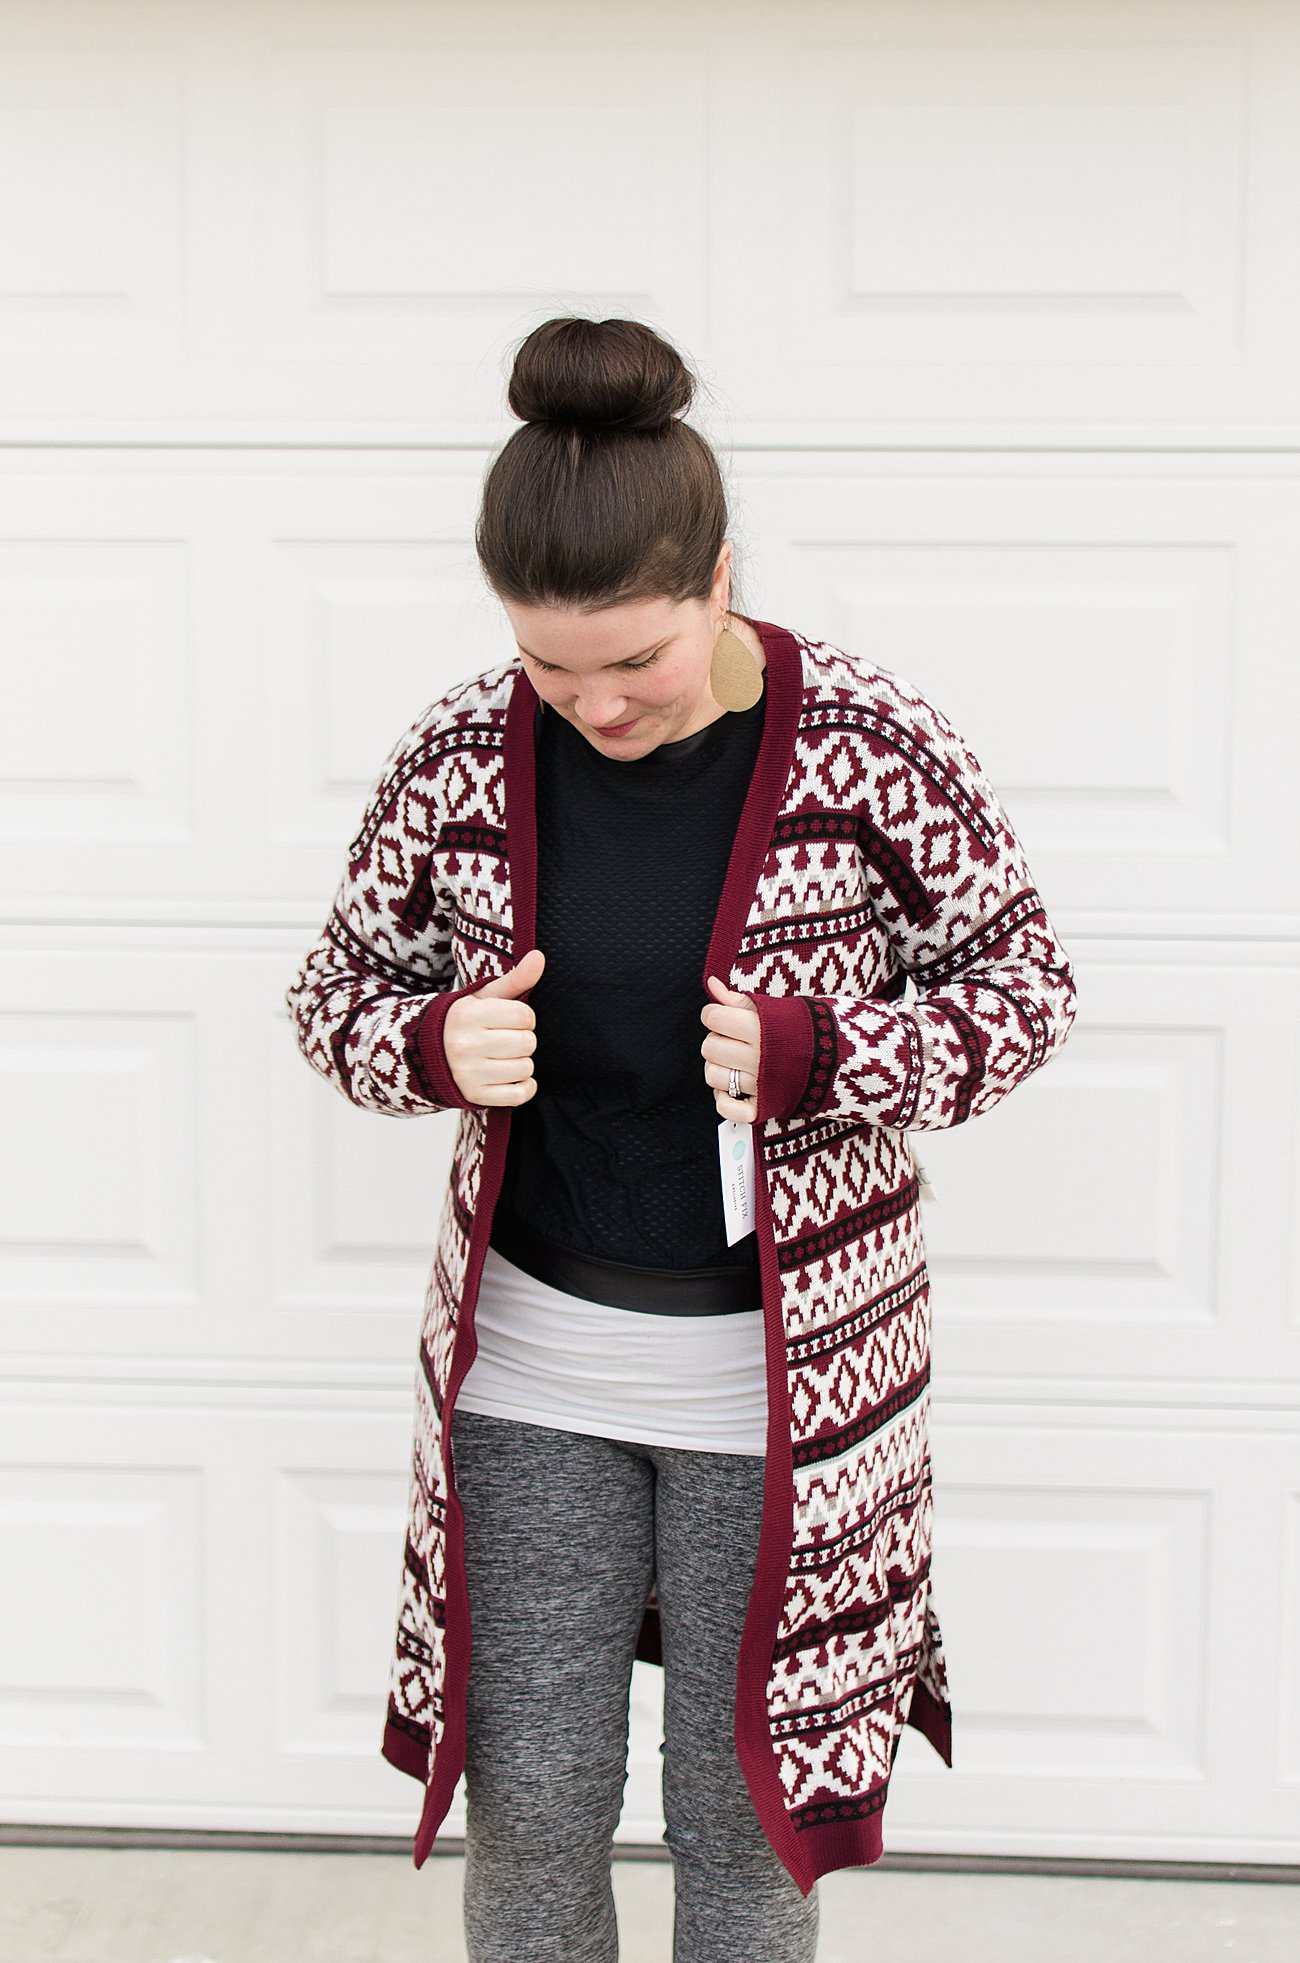 Stitch Fix ABSOLUTELY - Ailey Duster Cardigan - SIZE: L - $44 (Made in the USA) - My 50th Fix & 5 Tips for Developing a Relationship with Your Stitch Fix Stylist by popular North Carolina ethical fashion blogger Still Being Molly